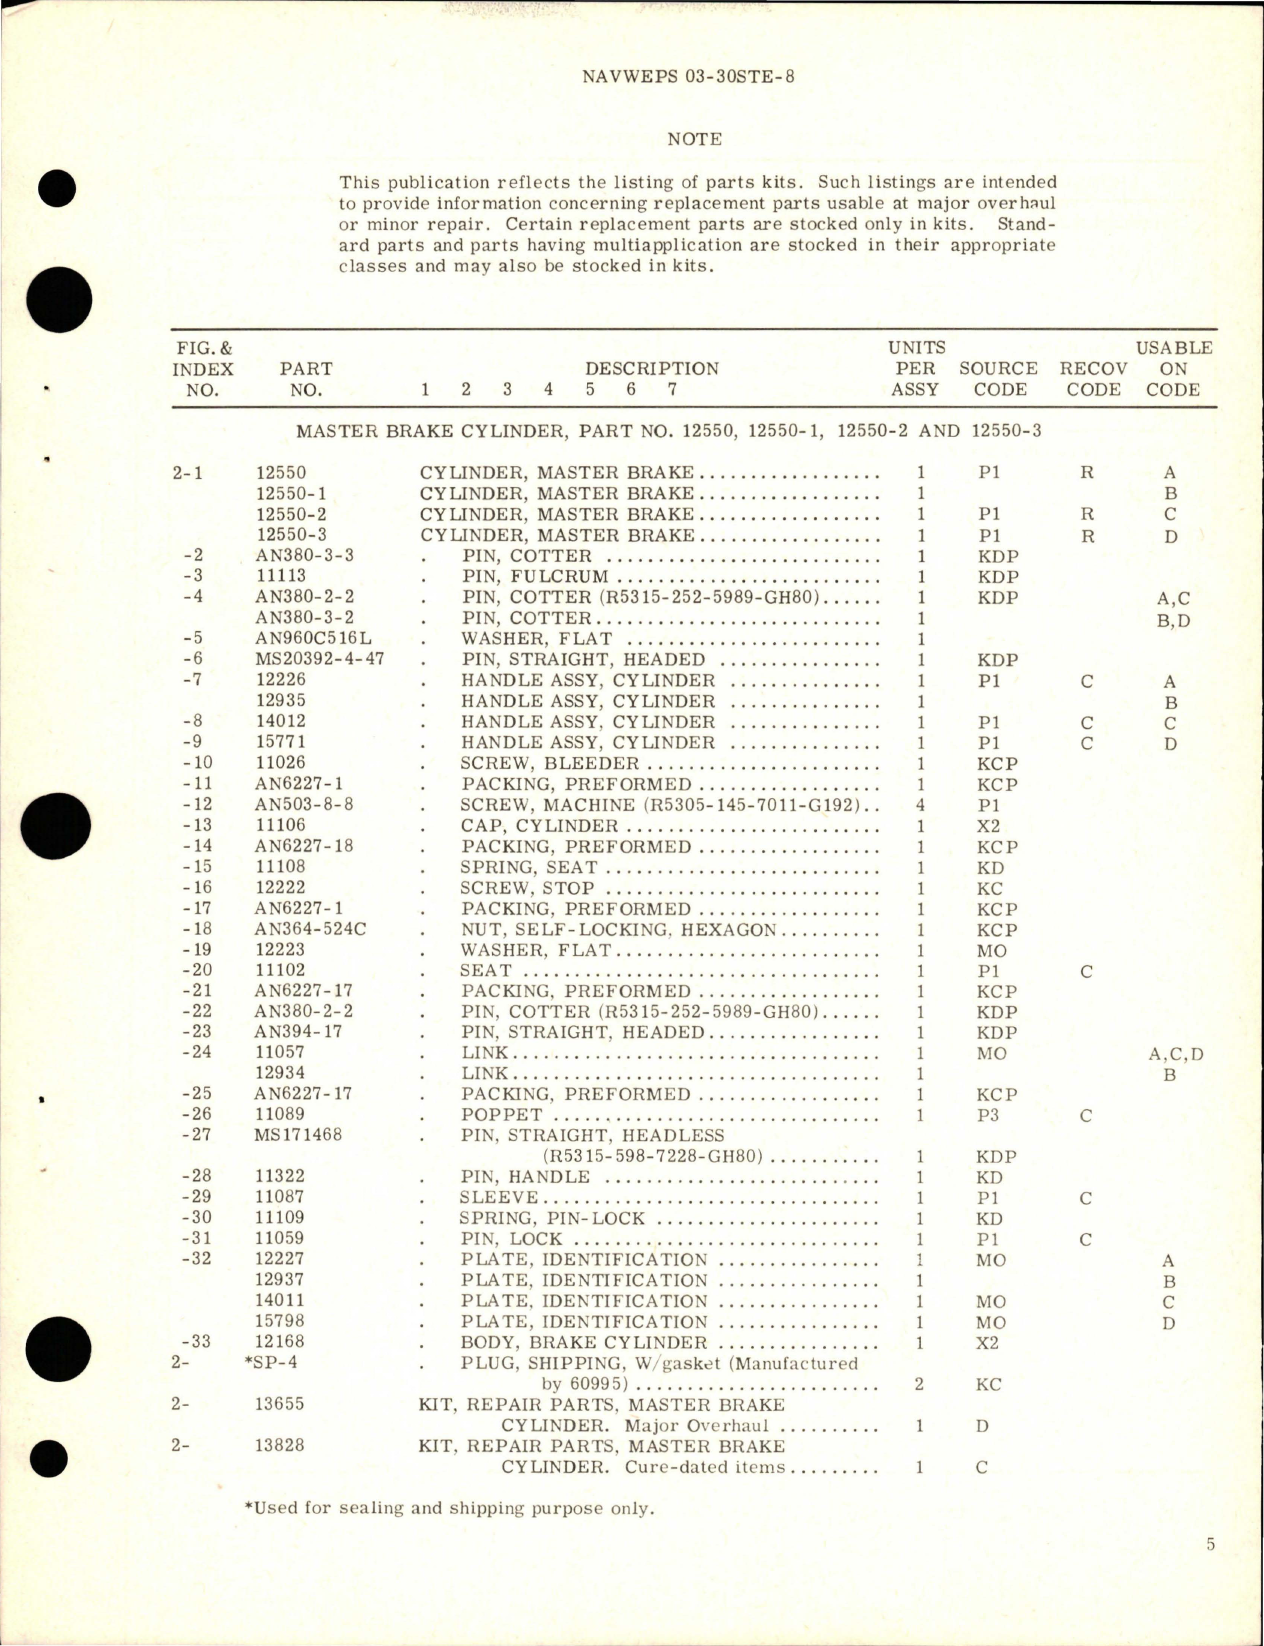 Sample page 5 from AirCorps Library document: Overhaul Instructions with Parts Breakdown for Master Brake Cylinder - Parts 12550, 12550-1, 12550-2, and 12550-3